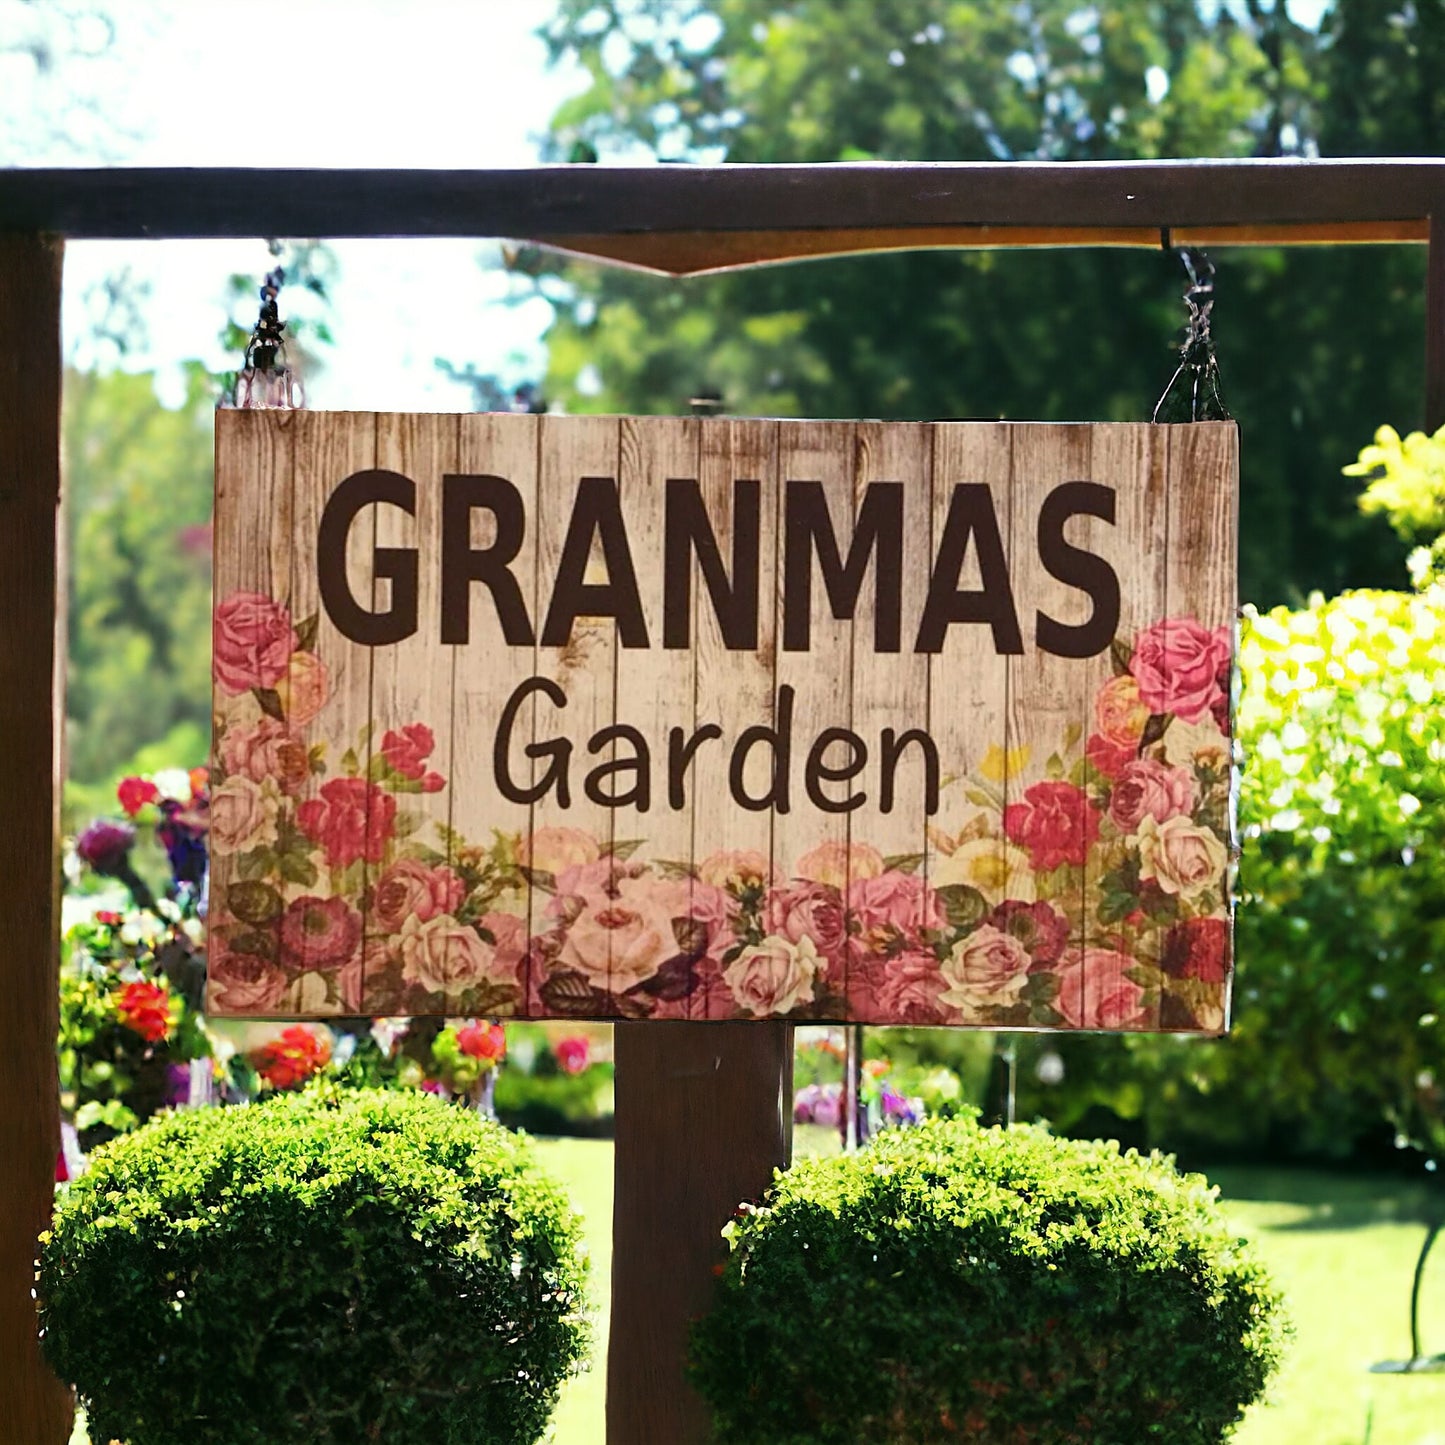 Granmas Garden Floral Rose Sign - The Renmy Store Homewares & Gifts 